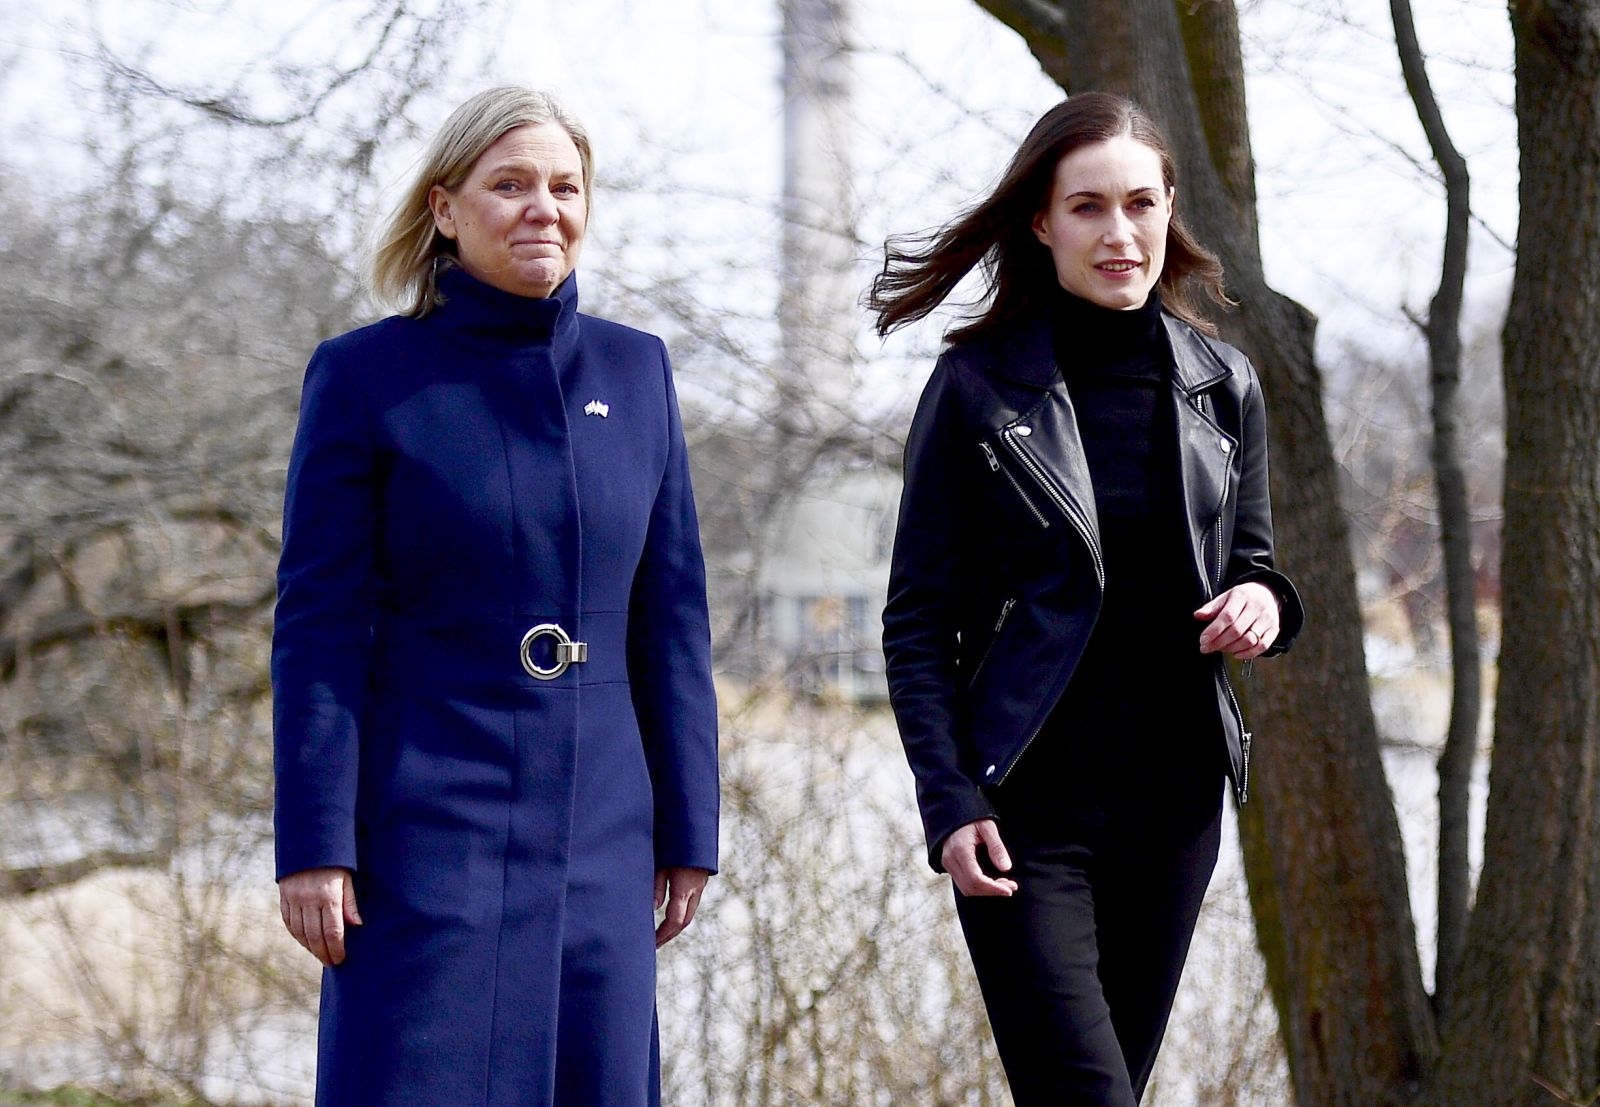 epa09887662 Swedish Prime Minister Magdalena Andersson (L) receives Finnish Prime Minister Sanna Marin prior to a meeting in Stockholm, Sweden, 13 April 2022. The two officials will have talks that are expected to focus on developments following the Russian invasion of Ukraine and the possible seeking to gain NATO membership.  EPA/PAUL WENNERHOLM  SWEDEN OUT